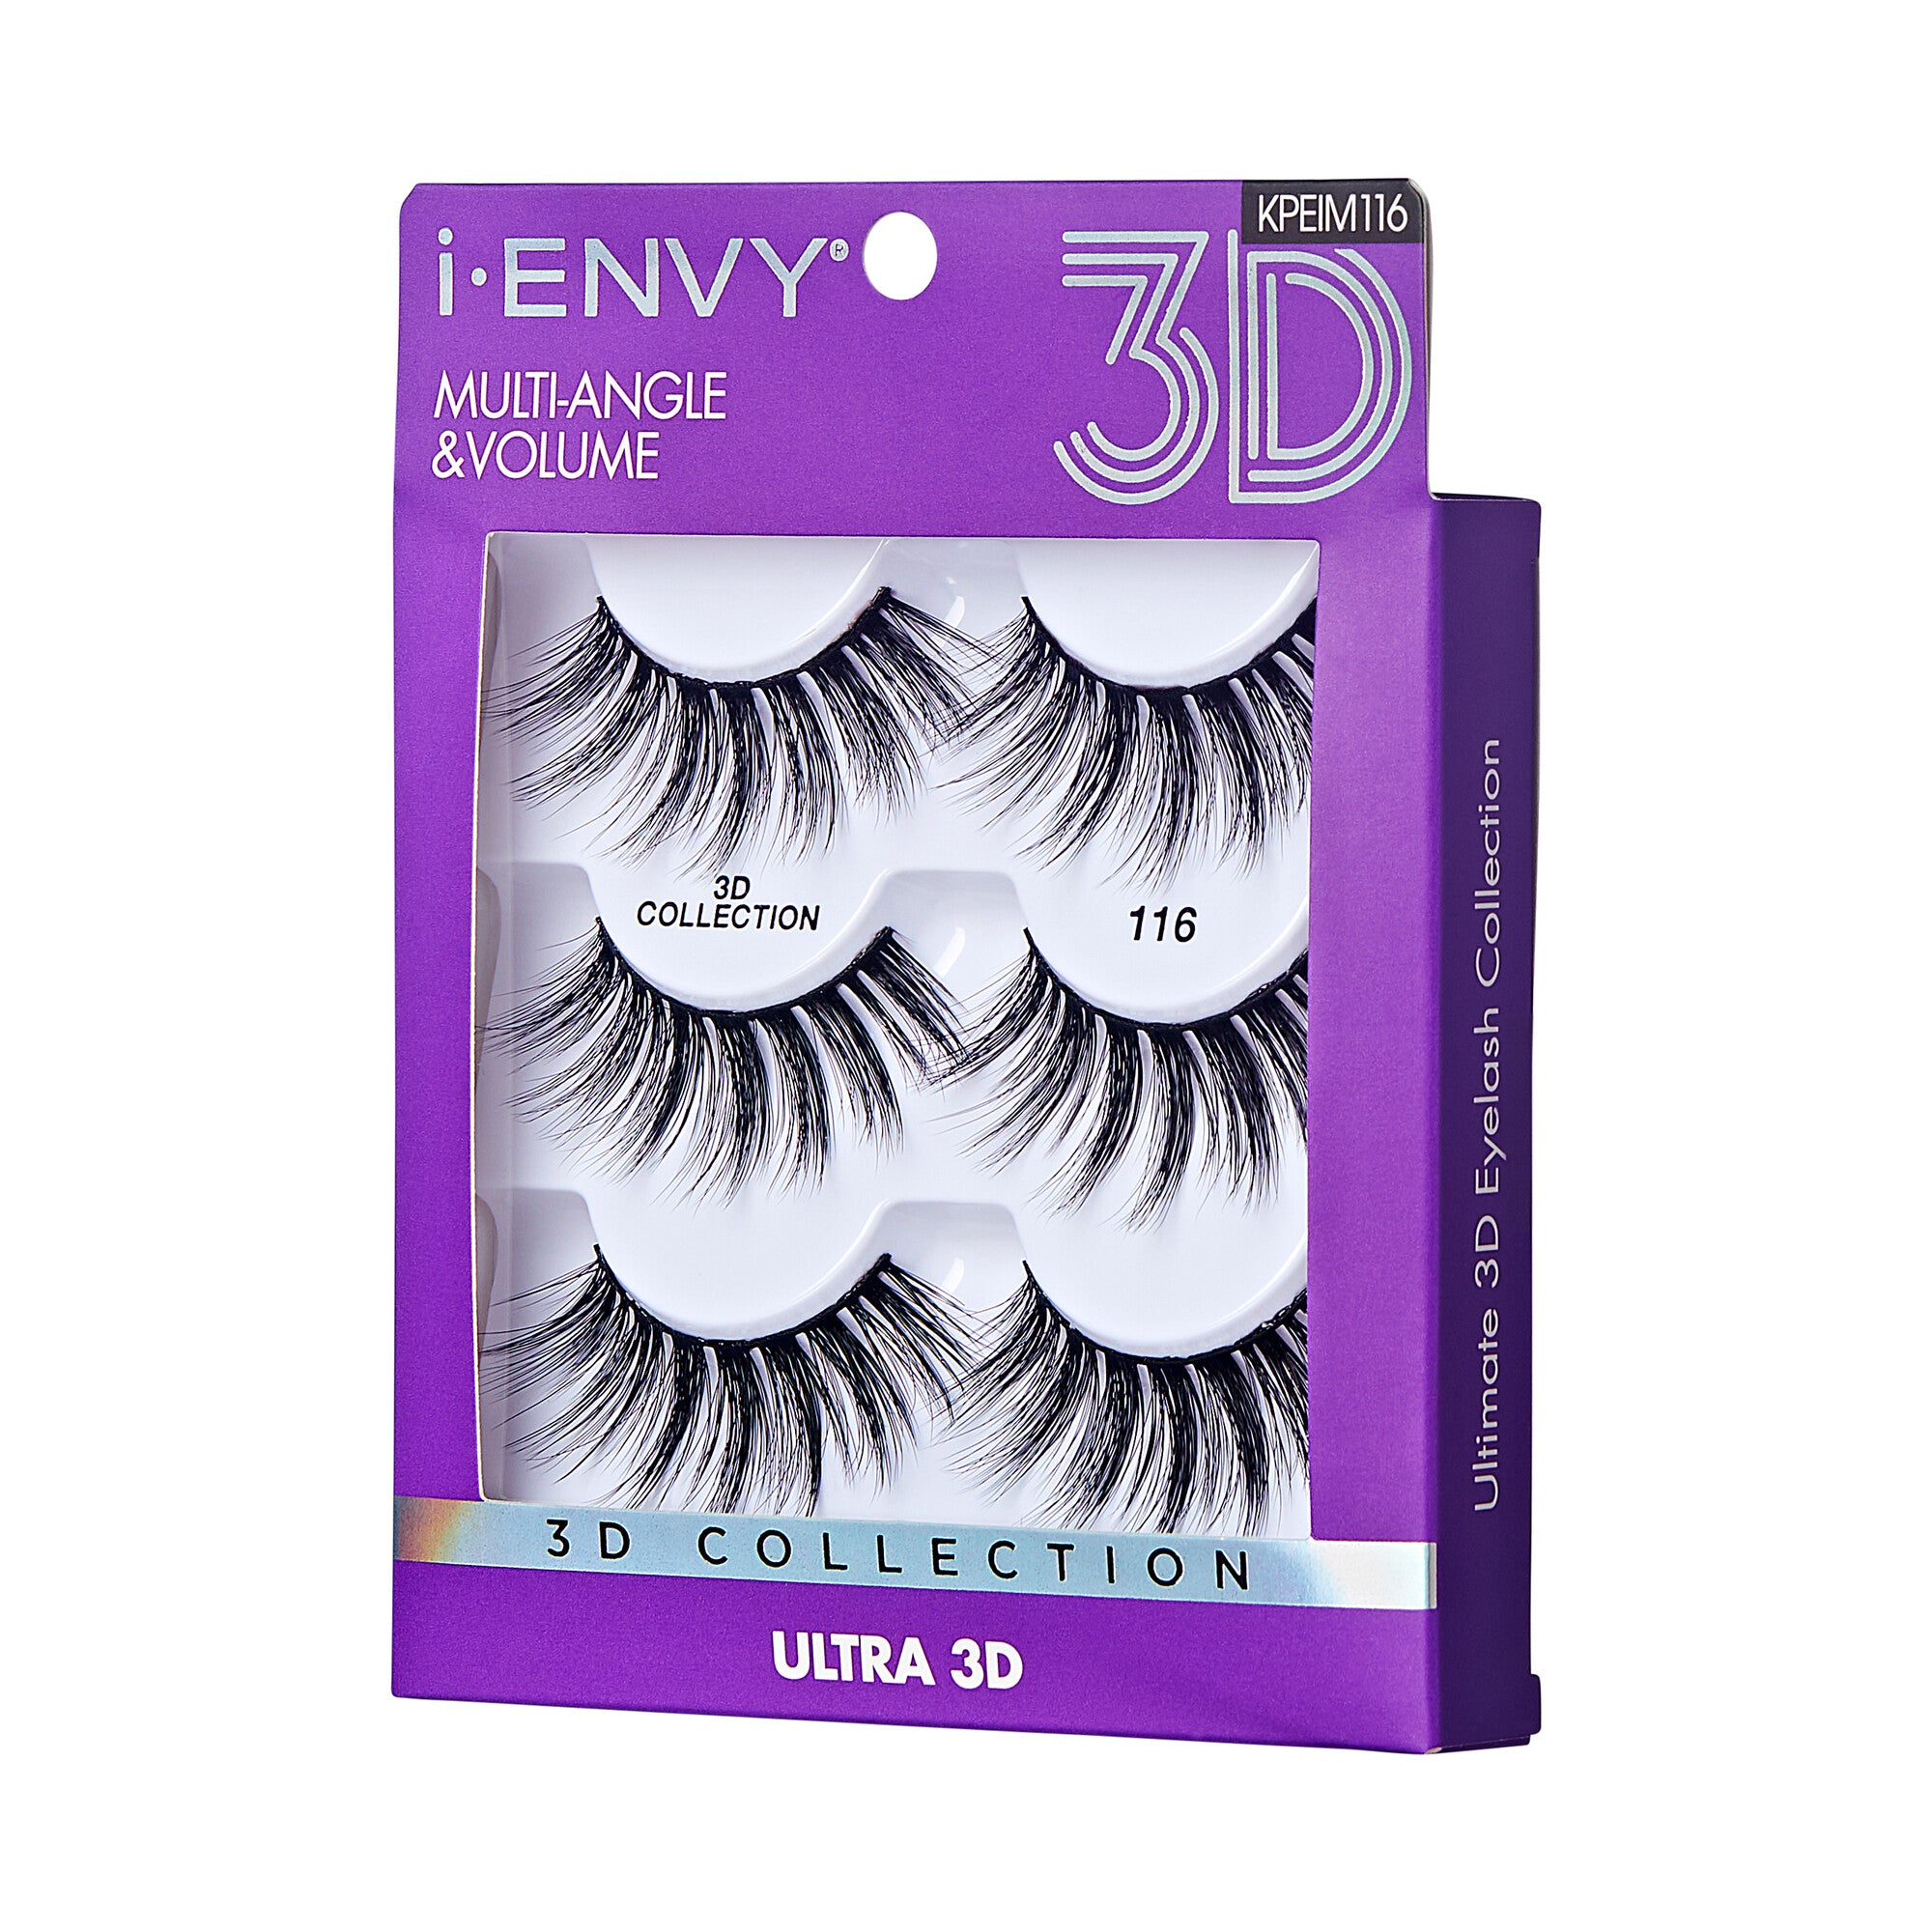 I.Envy By Kiss 3D Lashes Multi Pack Multiangle & Volume Collection-116 (KPEIM116)